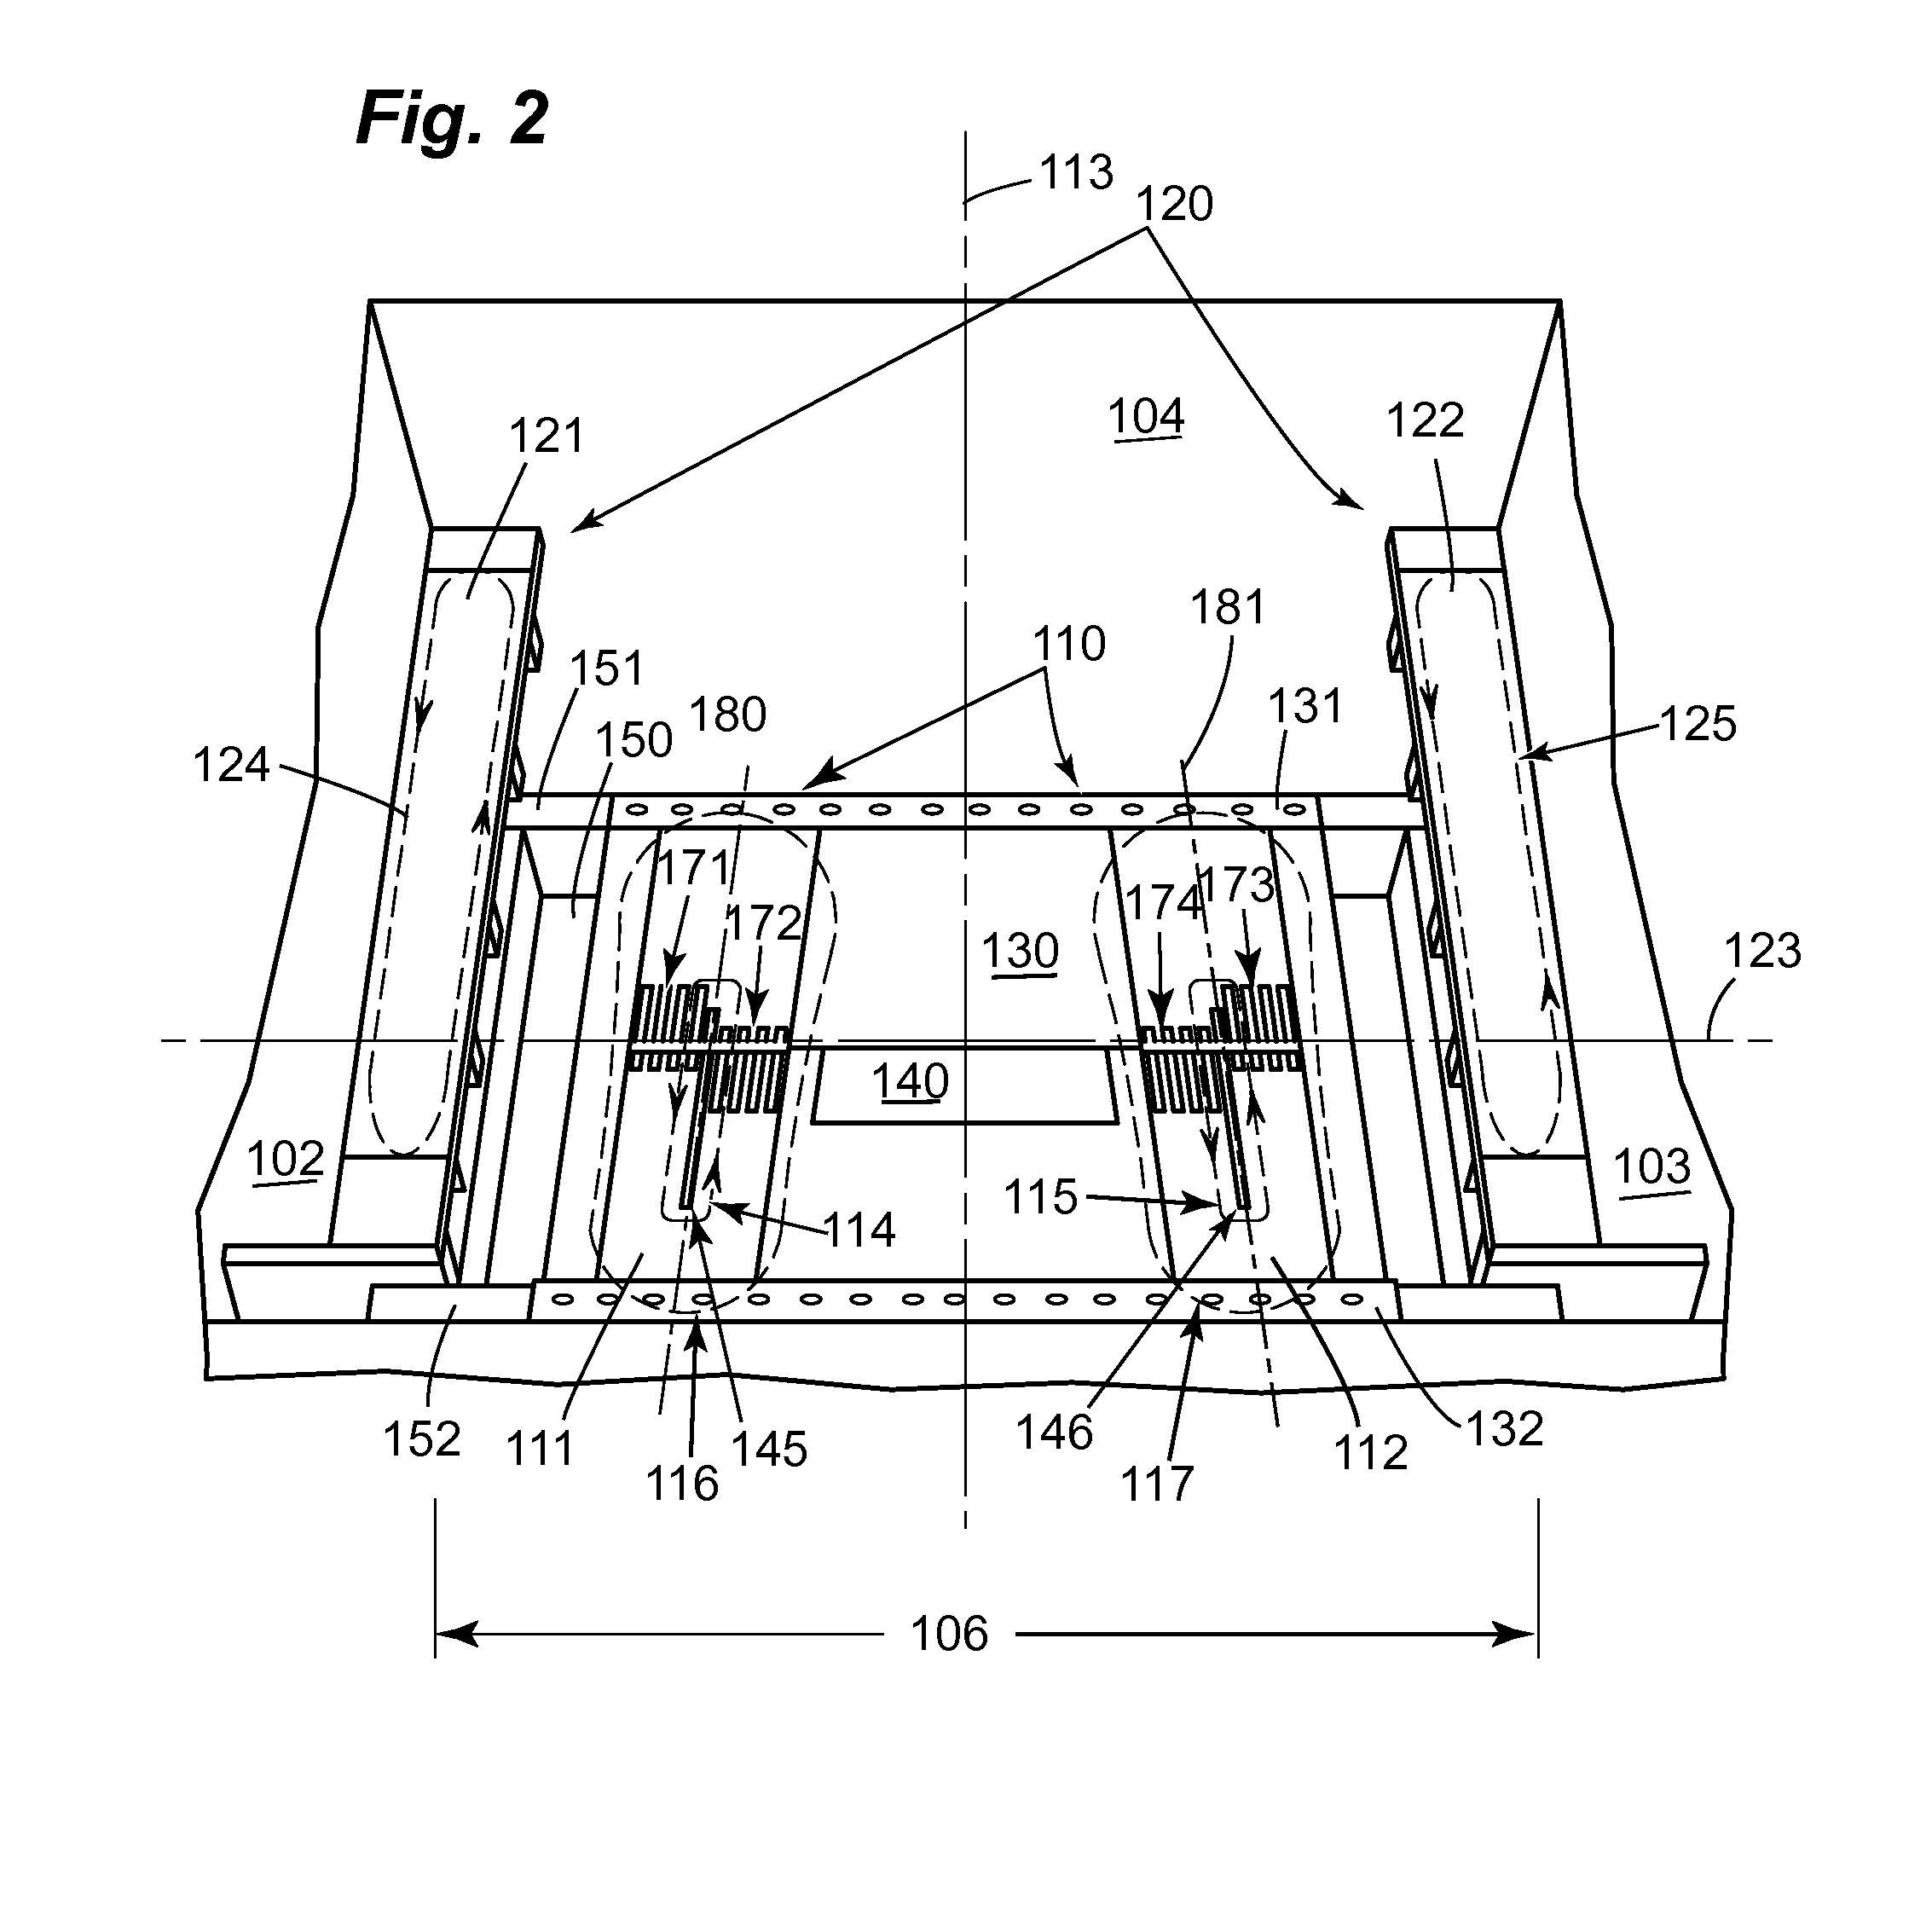 Apparatus and method for detecting metallic objects in shoes